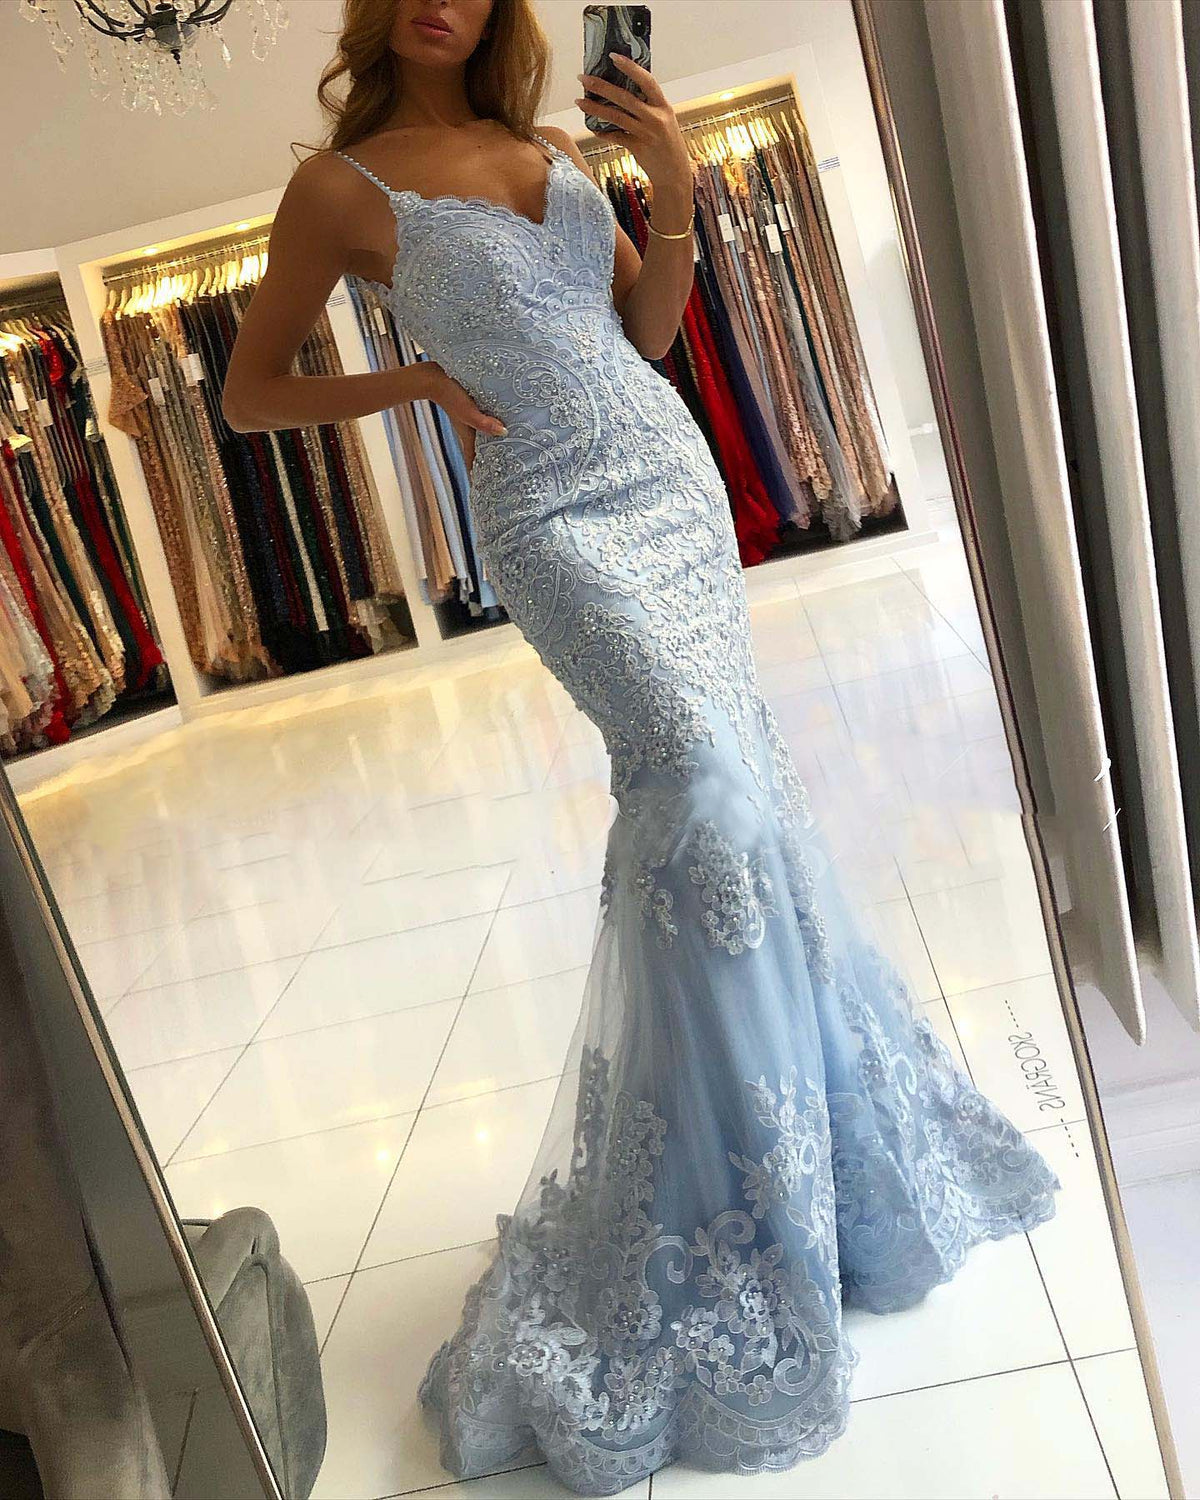 Sky Baby Blue Mermaid Senior Prom Dresses with Lace Aqqpliqued Formal Gown with Straps PL01109